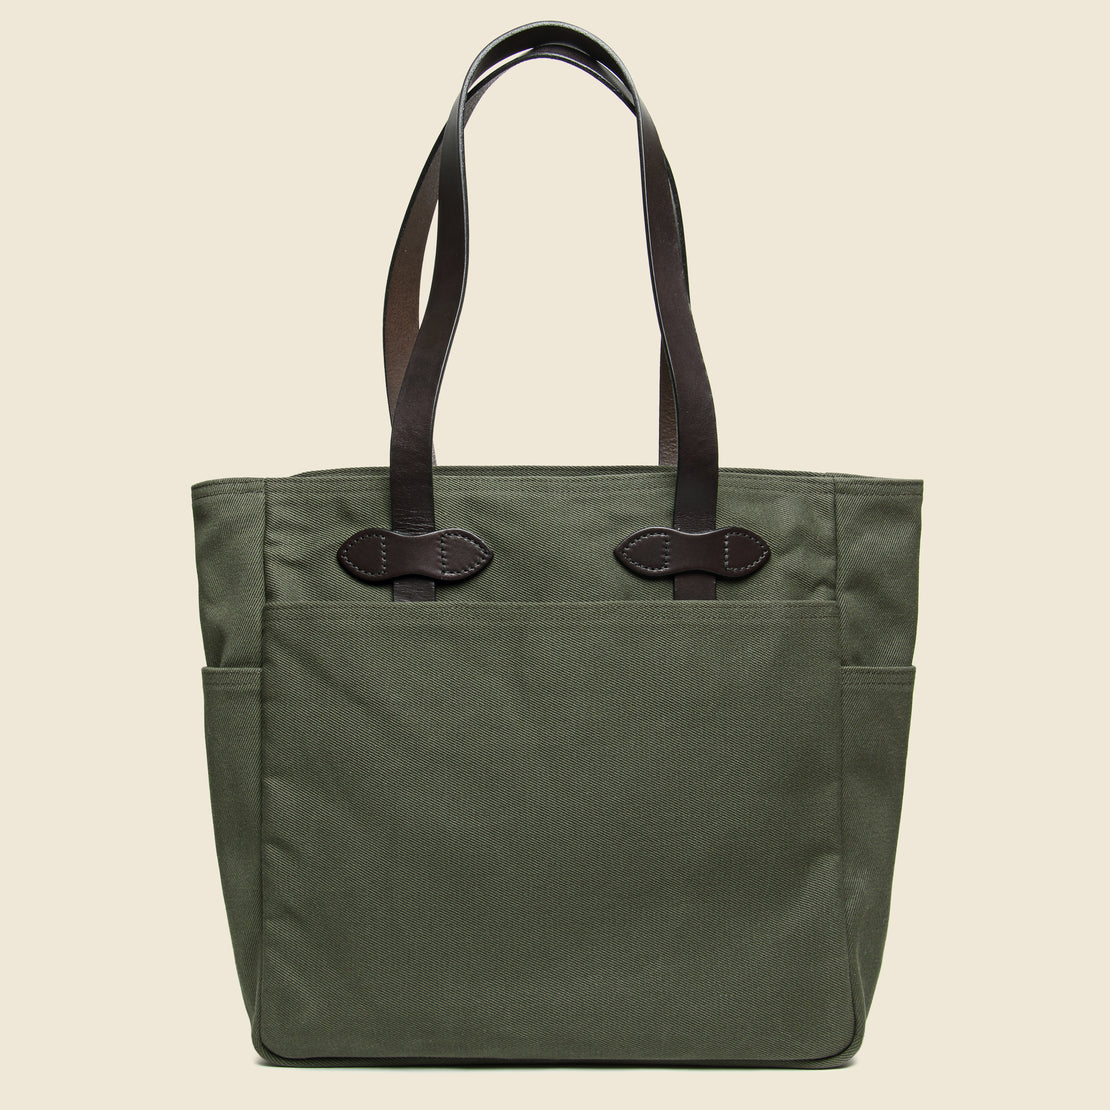 Filson Rugged Twill Tote Bag - Otter Green